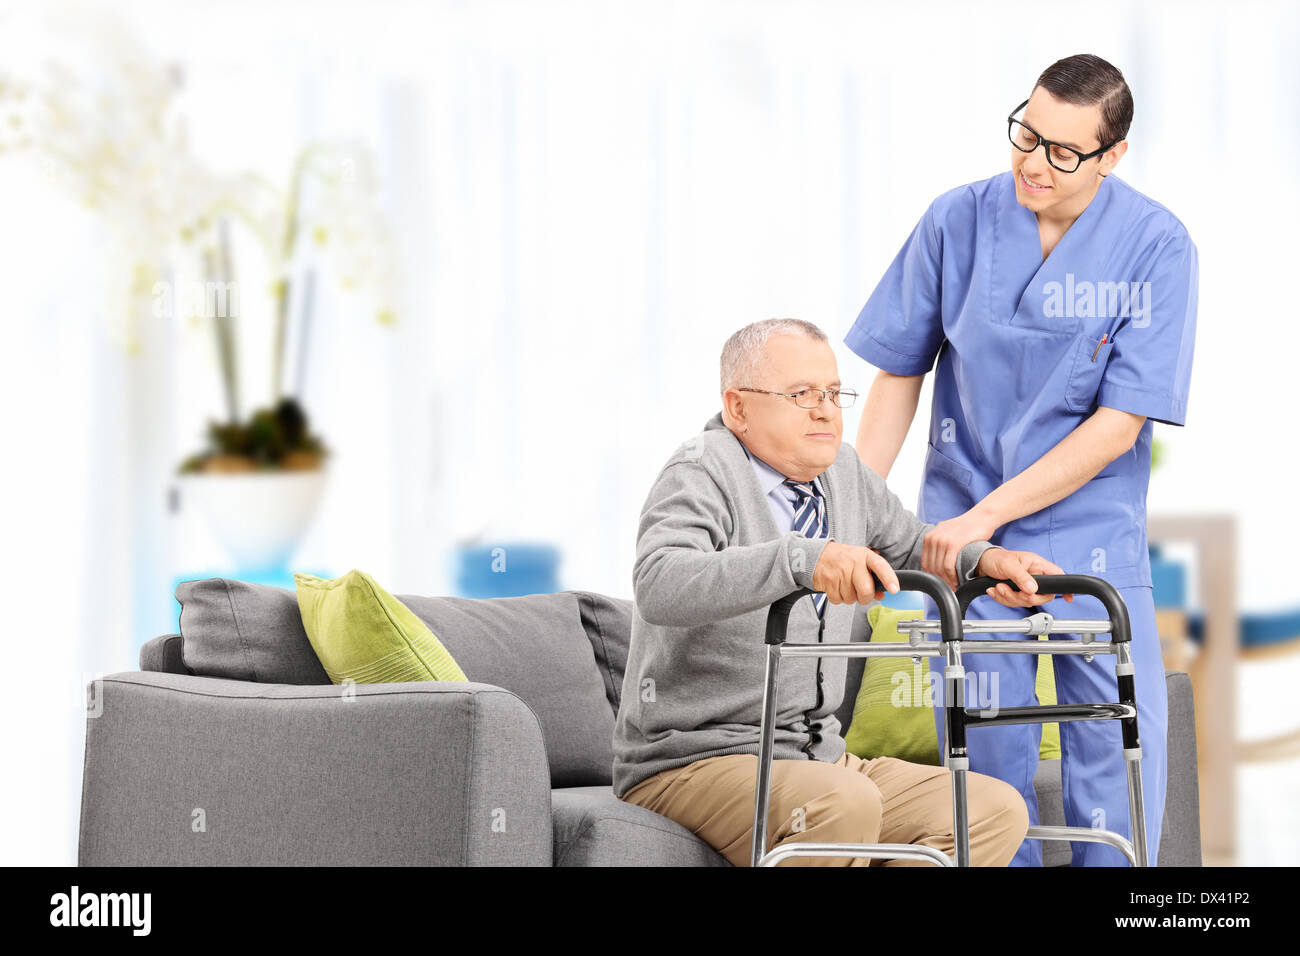 Male nurse helping an elderly gentleman to stand up in a nursing home Stock Photo